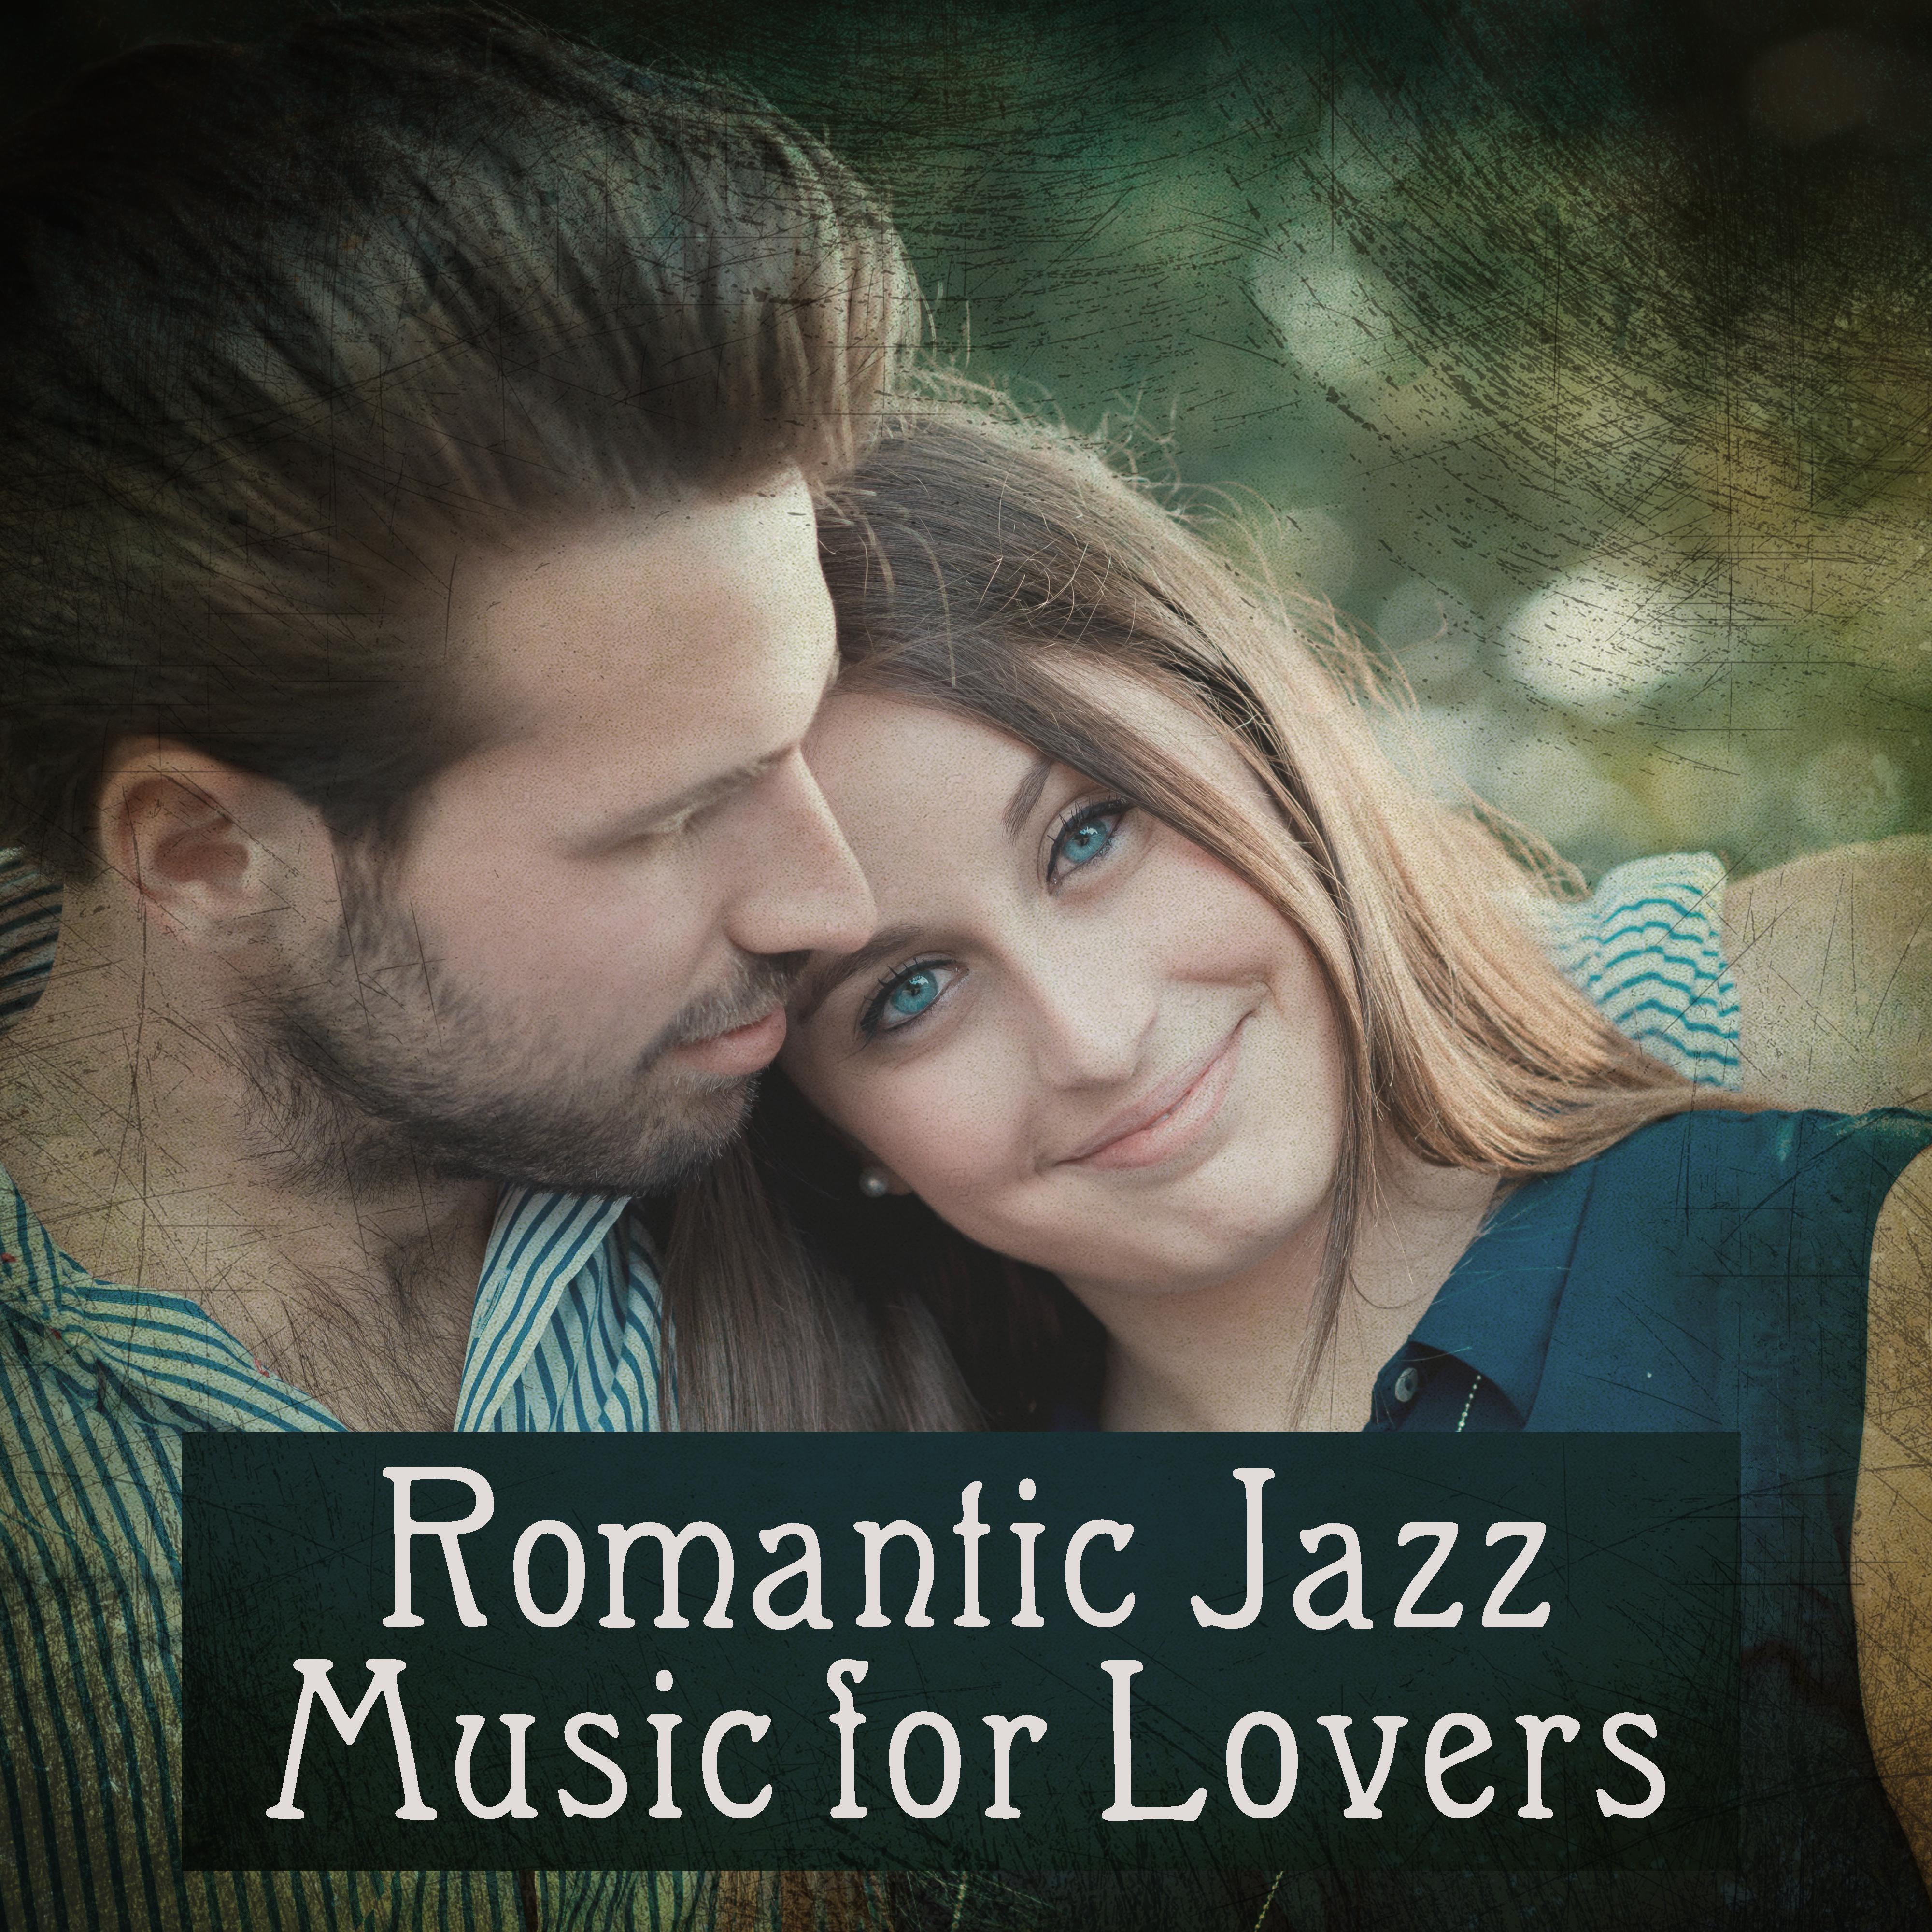 Romantic Jazz Music for Lovers  Soft Sounds to Relax, Peaceful Jazz for Lovers, Hot Evening Music